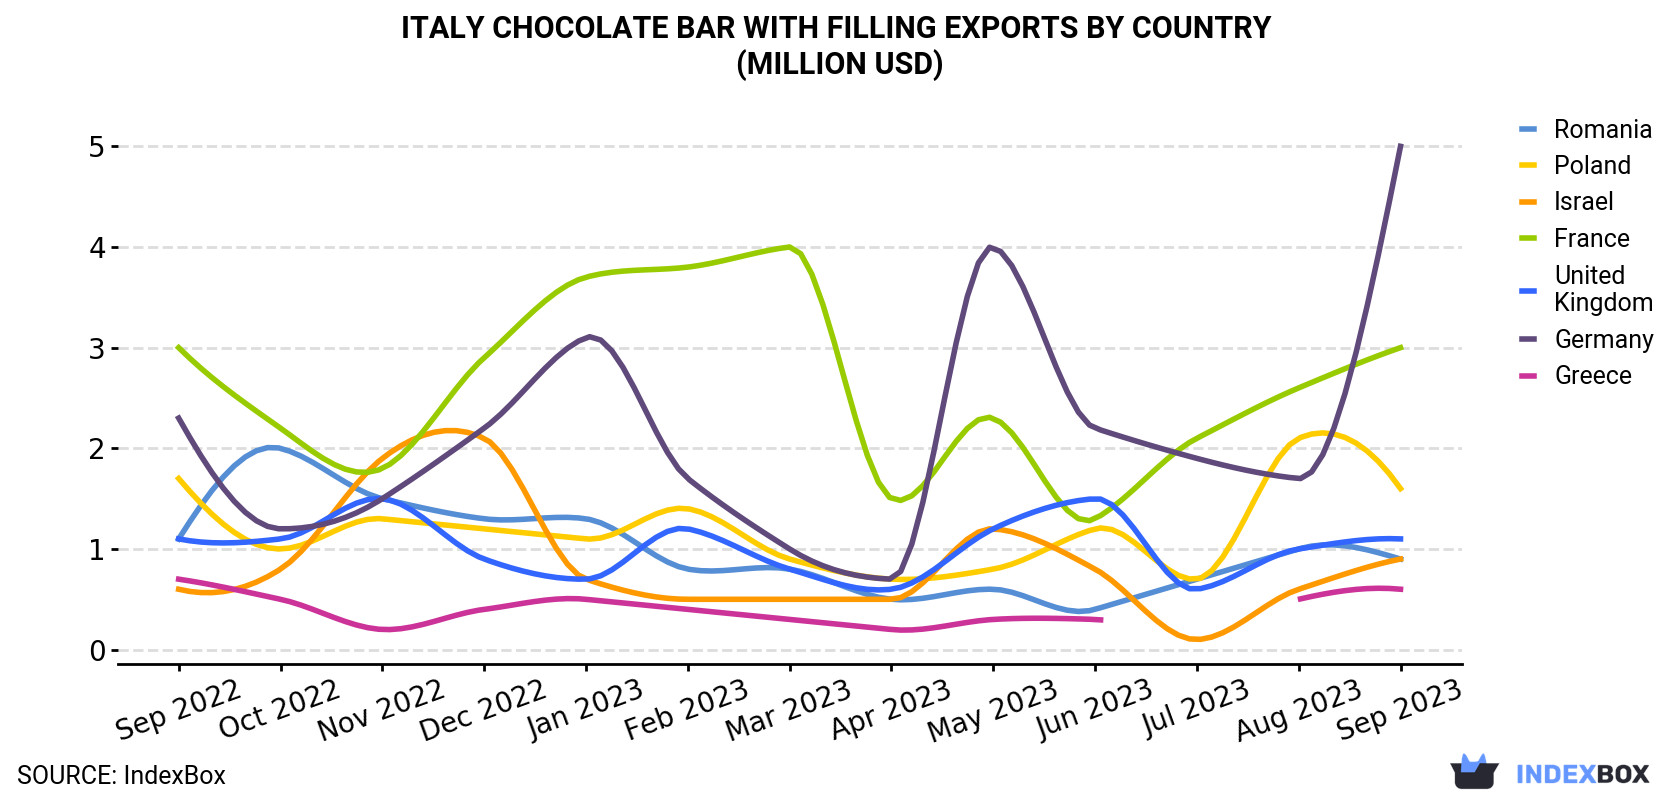 Italy Chocolate Bar With Filling Exports By Country (Million USD)